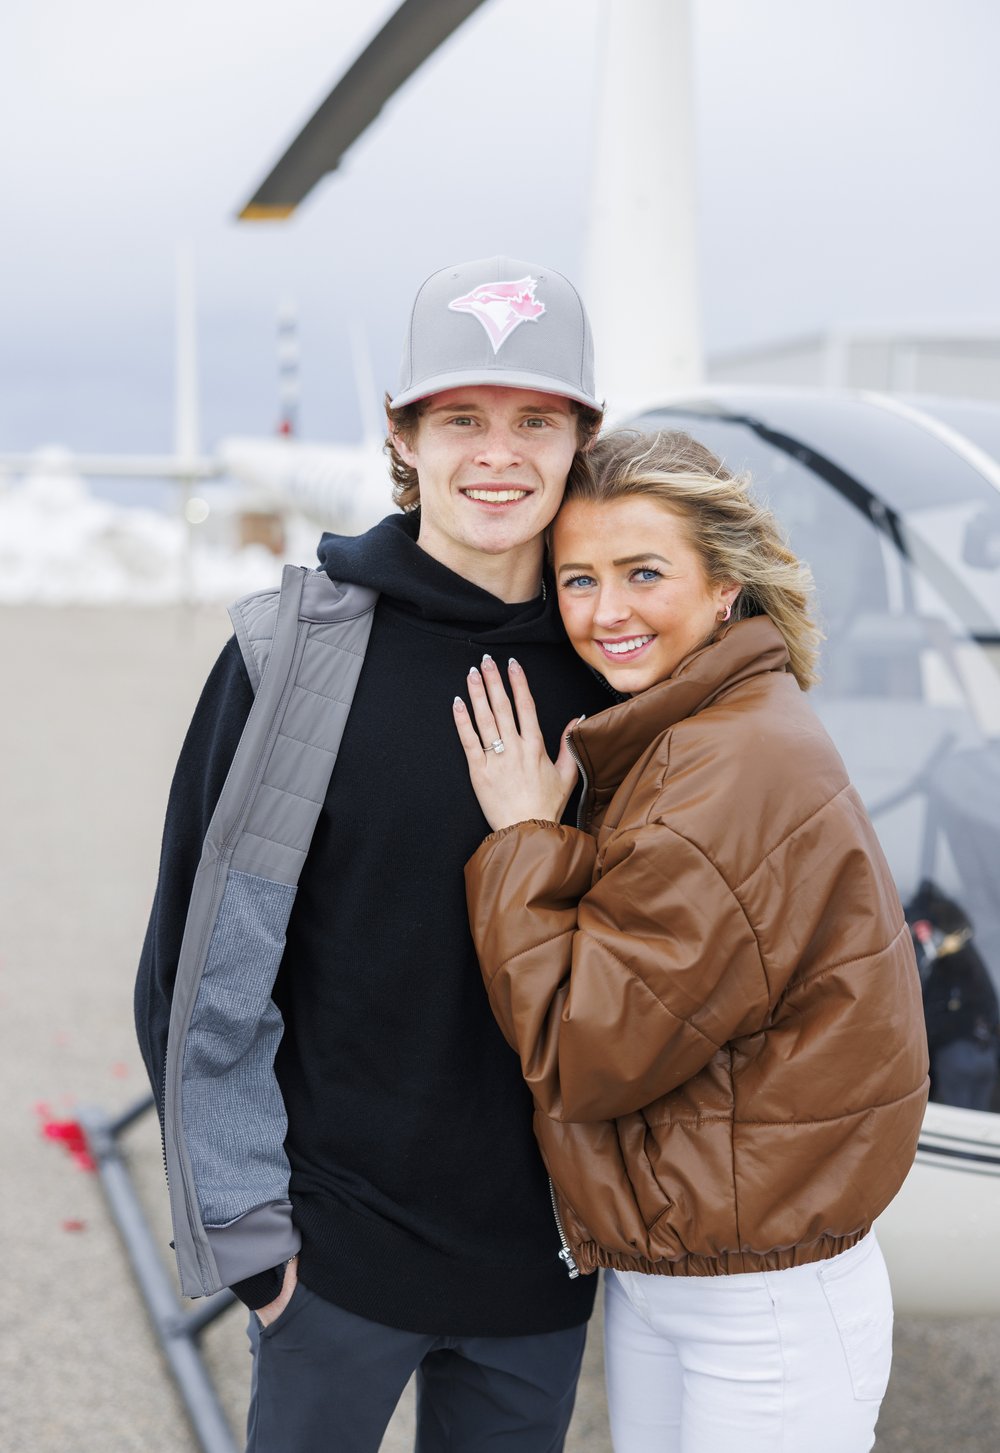  Bride and groom smiling for a portrait during a helicopter proposal captured by Savanna Richardson Photography. Professional proposal photographers in Northern Utah #SavannaRichardsonPhotography #SavannaRichardsonEngagements #utahproposals #helicopt